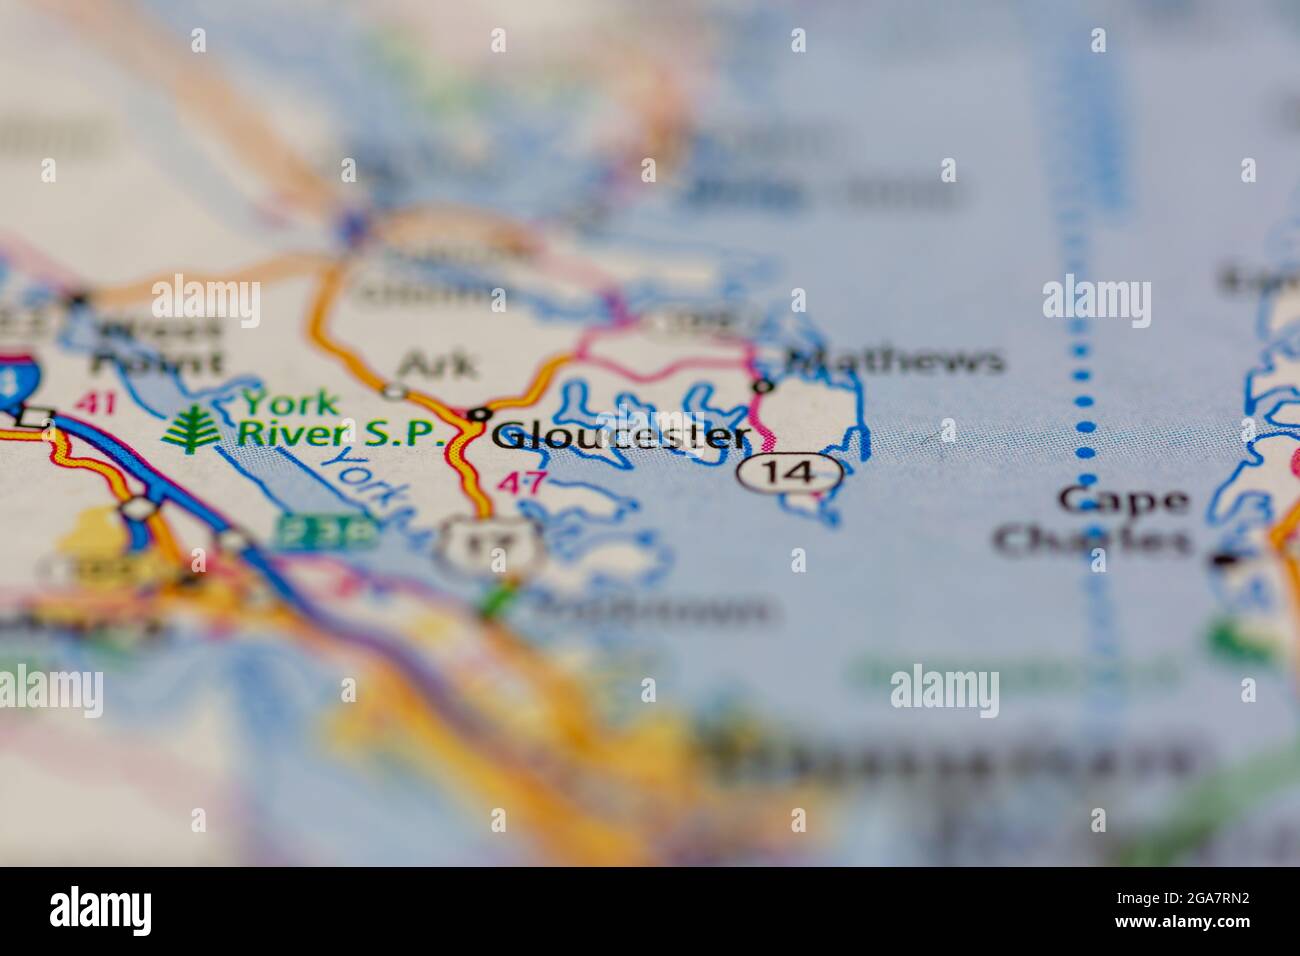 Gloucester Virginia shown on a road map or Geography map Stock Photo